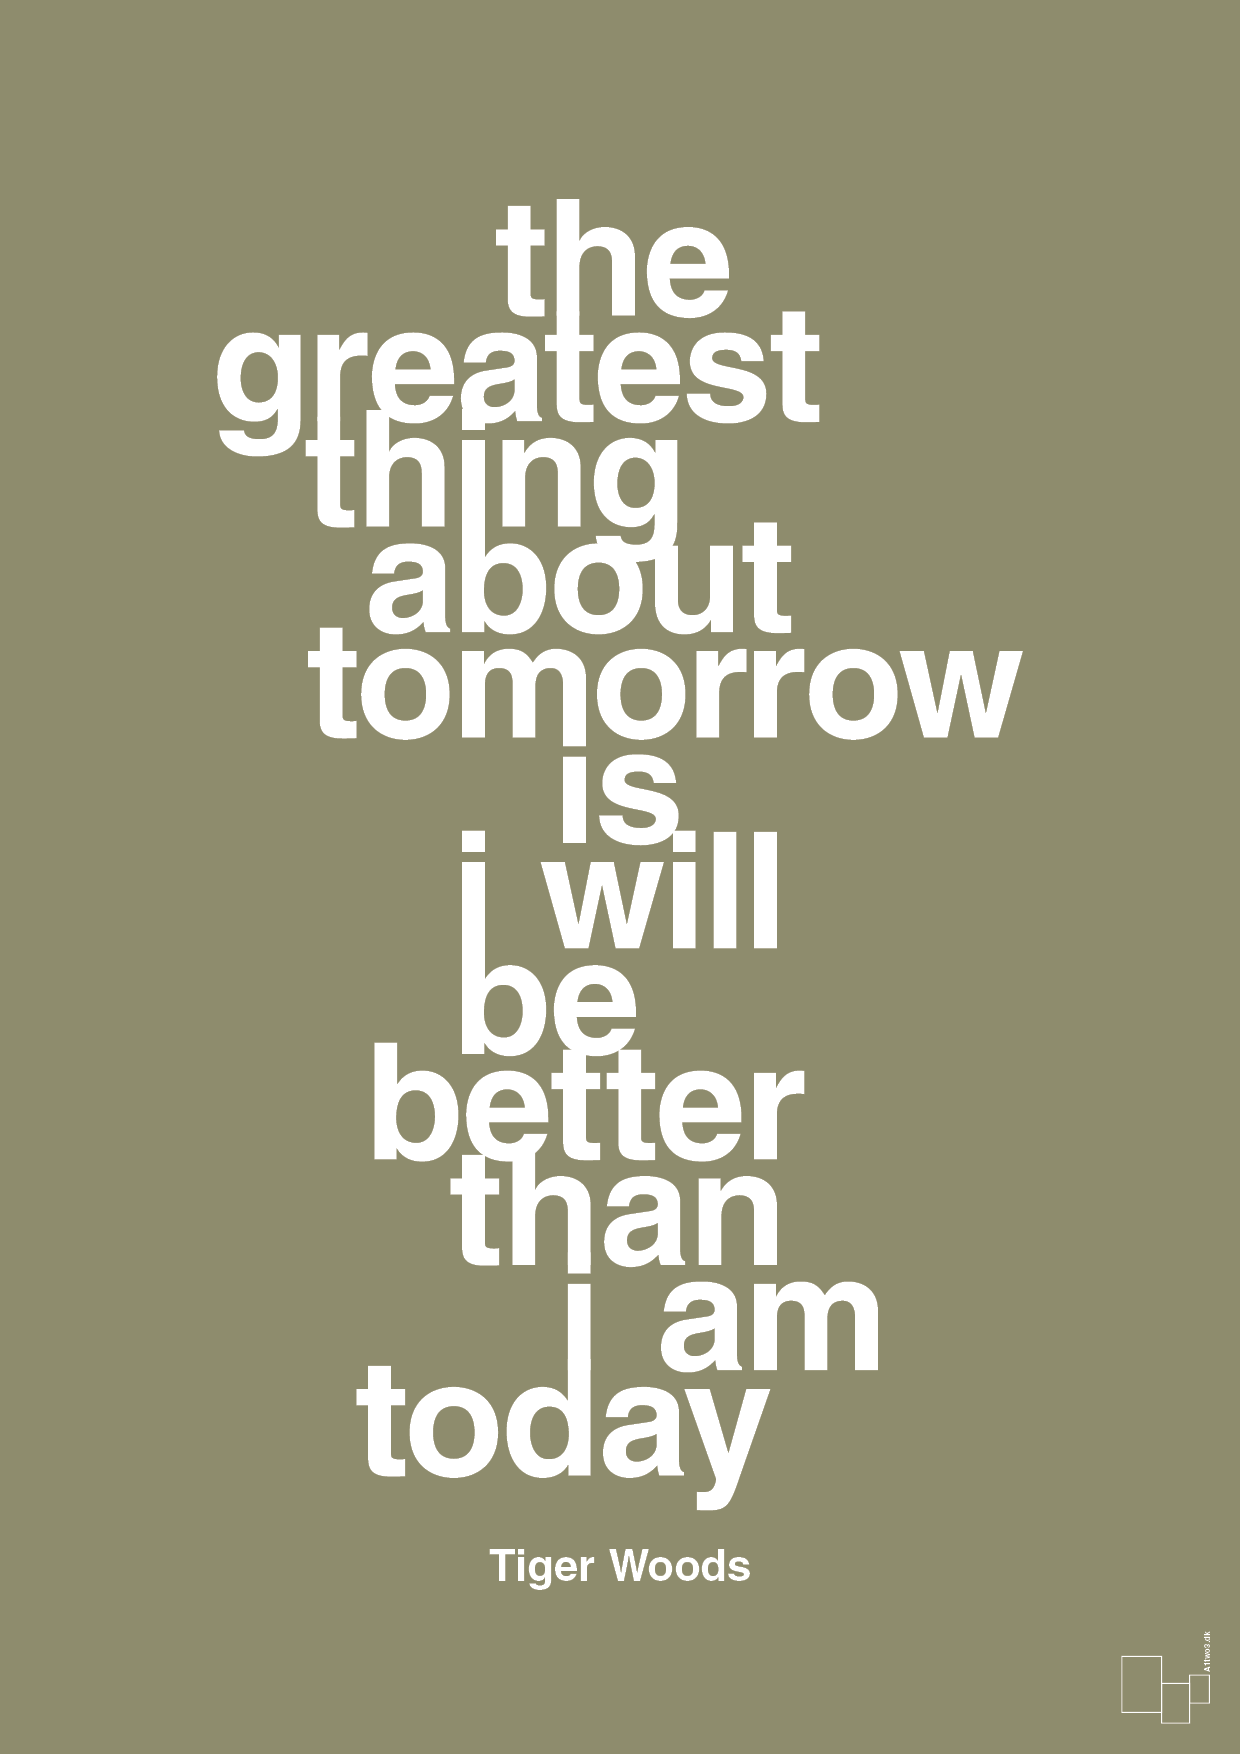 the greatest thing about tomorrow is i will be better than i am today - Plakat med Citater i Misty Forrest